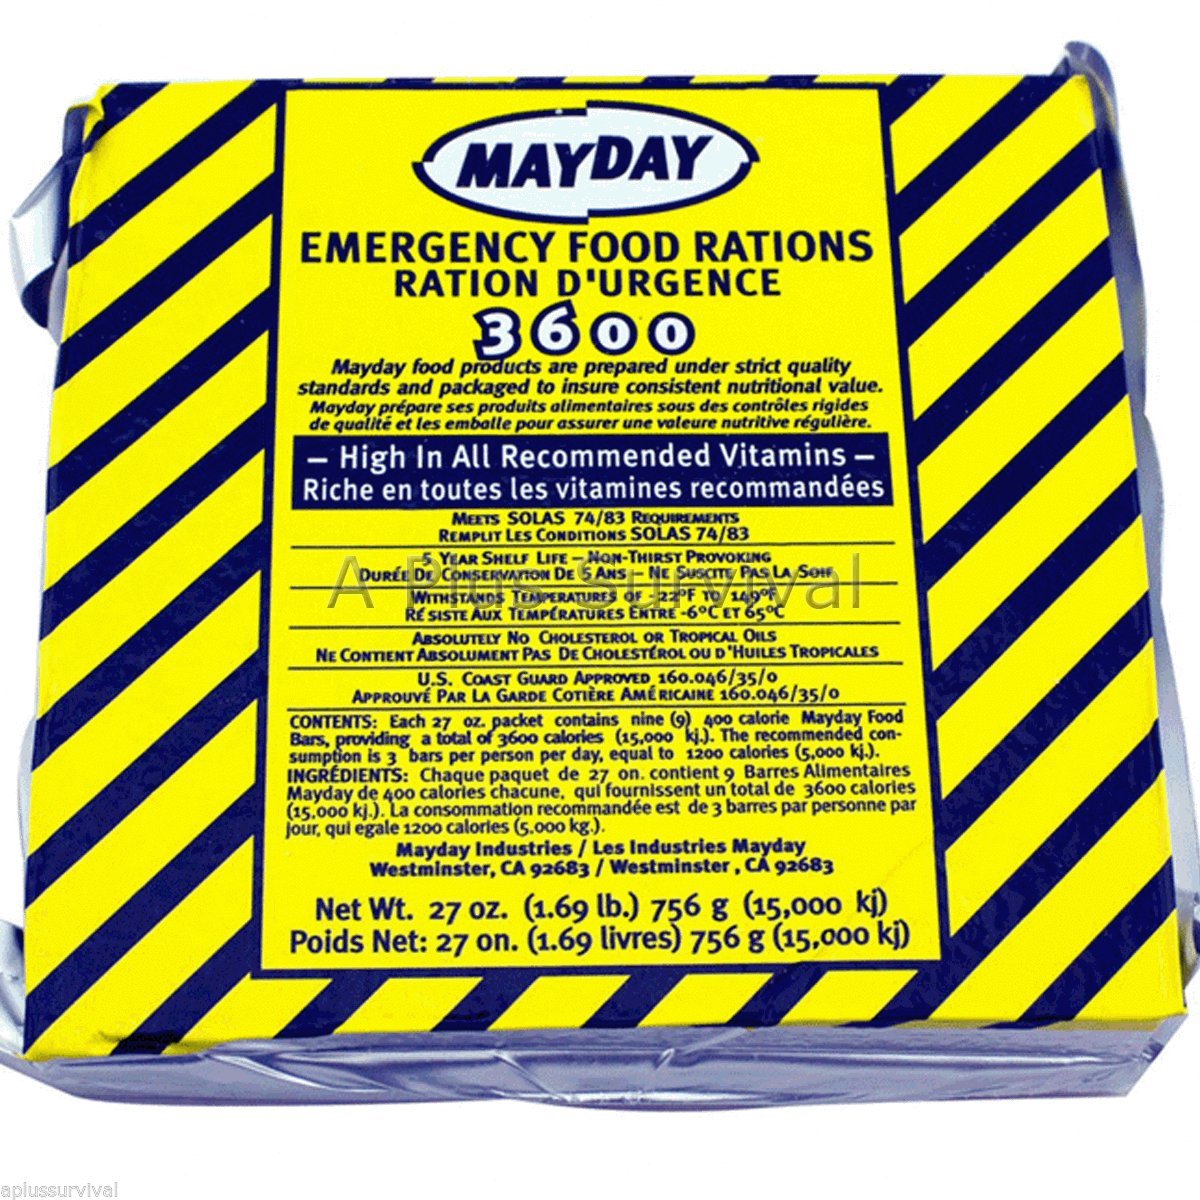 Mayday Emergency Food Rations 3600 Calories- 9 Meals, 3 Days, Bug Out